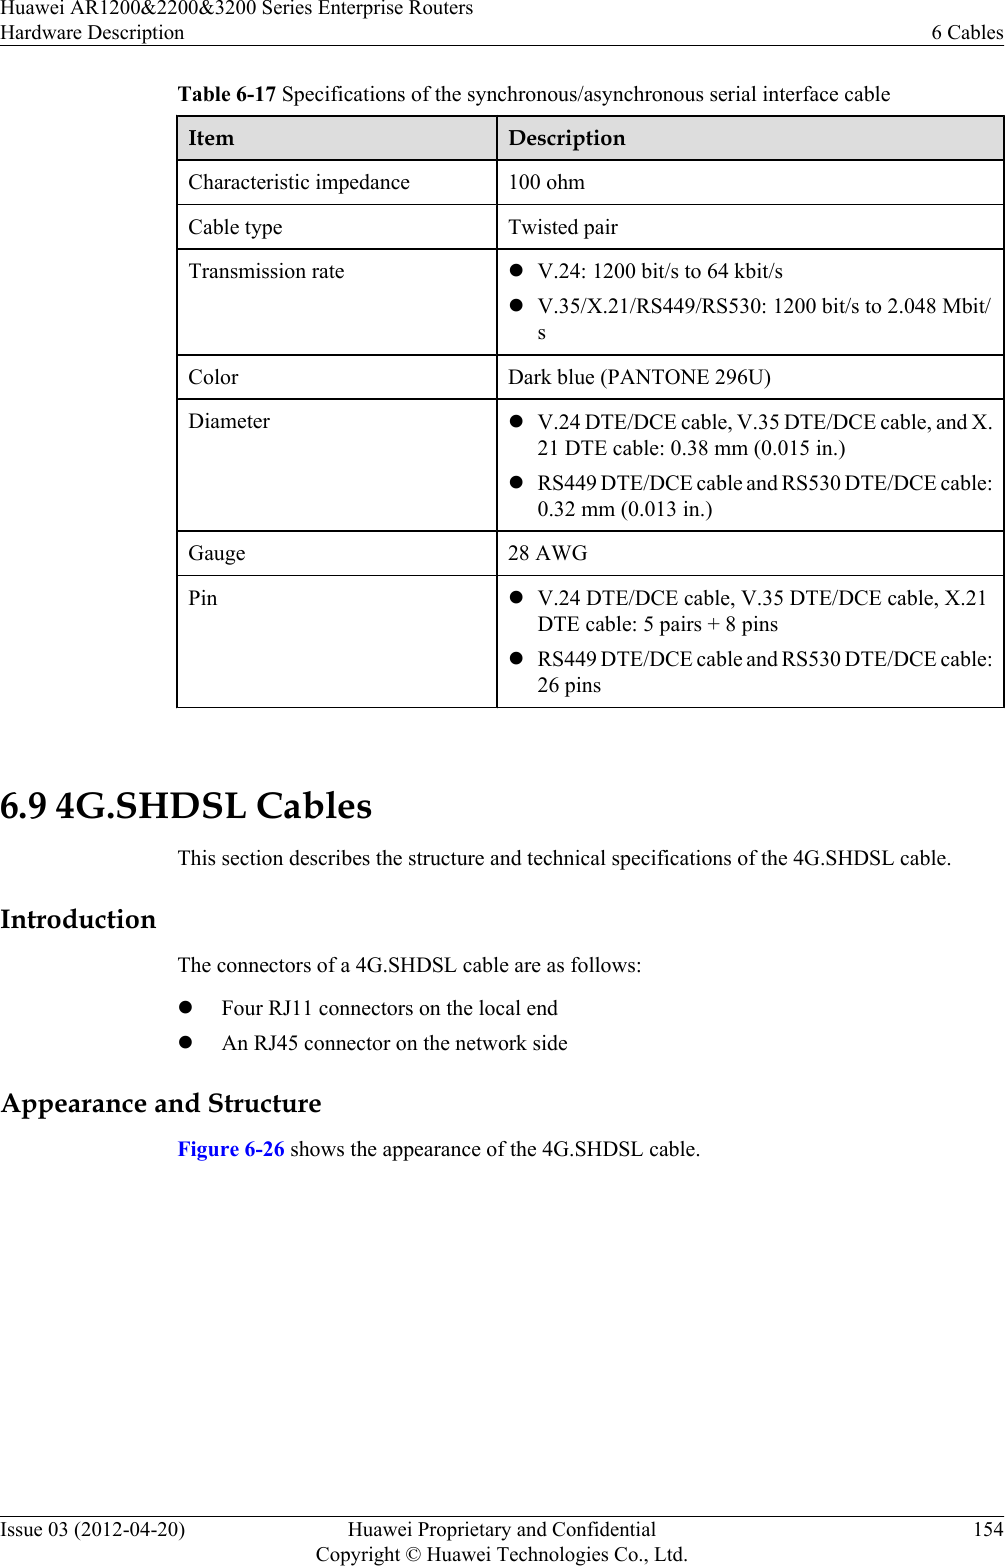 Table 6-17 Specifications of the synchronous/asynchronous serial interface cableItem DescriptionCharacteristic impedance 100 ohmCable type Twisted pairTransmission rate lV.24: 1200 bit/s to 64 kbit/slV.35/X.21/RS449/RS530: 1200 bit/s to 2.048 Mbit/sColor Dark blue (PANTONE 296U)Diameter lV.24 DTE/DCE cable, V.35 DTE/DCE cable, and X.21 DTE cable: 0.38 mm (0.015 in.)lRS449 DTE/DCE cable and RS530 DTE/DCE cable:0.32 mm (0.013 in.)Gauge 28 AWGPin lV.24 DTE/DCE cable, V.35 DTE/DCE cable, X.21DTE cable: 5 pairs + 8 pinslRS449 DTE/DCE cable and RS530 DTE/DCE cable:26 pins 6.9 4G.SHDSL CablesThis section describes the structure and technical specifications of the 4G.SHDSL cable.IntroductionThe connectors of a 4G.SHDSL cable are as follows:lFour RJ11 connectors on the local endlAn RJ45 connector on the network sideAppearance and StructureFigure 6-26 shows the appearance of the 4G.SHDSL cable.Huawei AR1200&amp;2200&amp;3200 Series Enterprise RoutersHardware Description 6 CablesIssue 03 (2012-04-20) Huawei Proprietary and ConfidentialCopyright © Huawei Technologies Co., Ltd.154